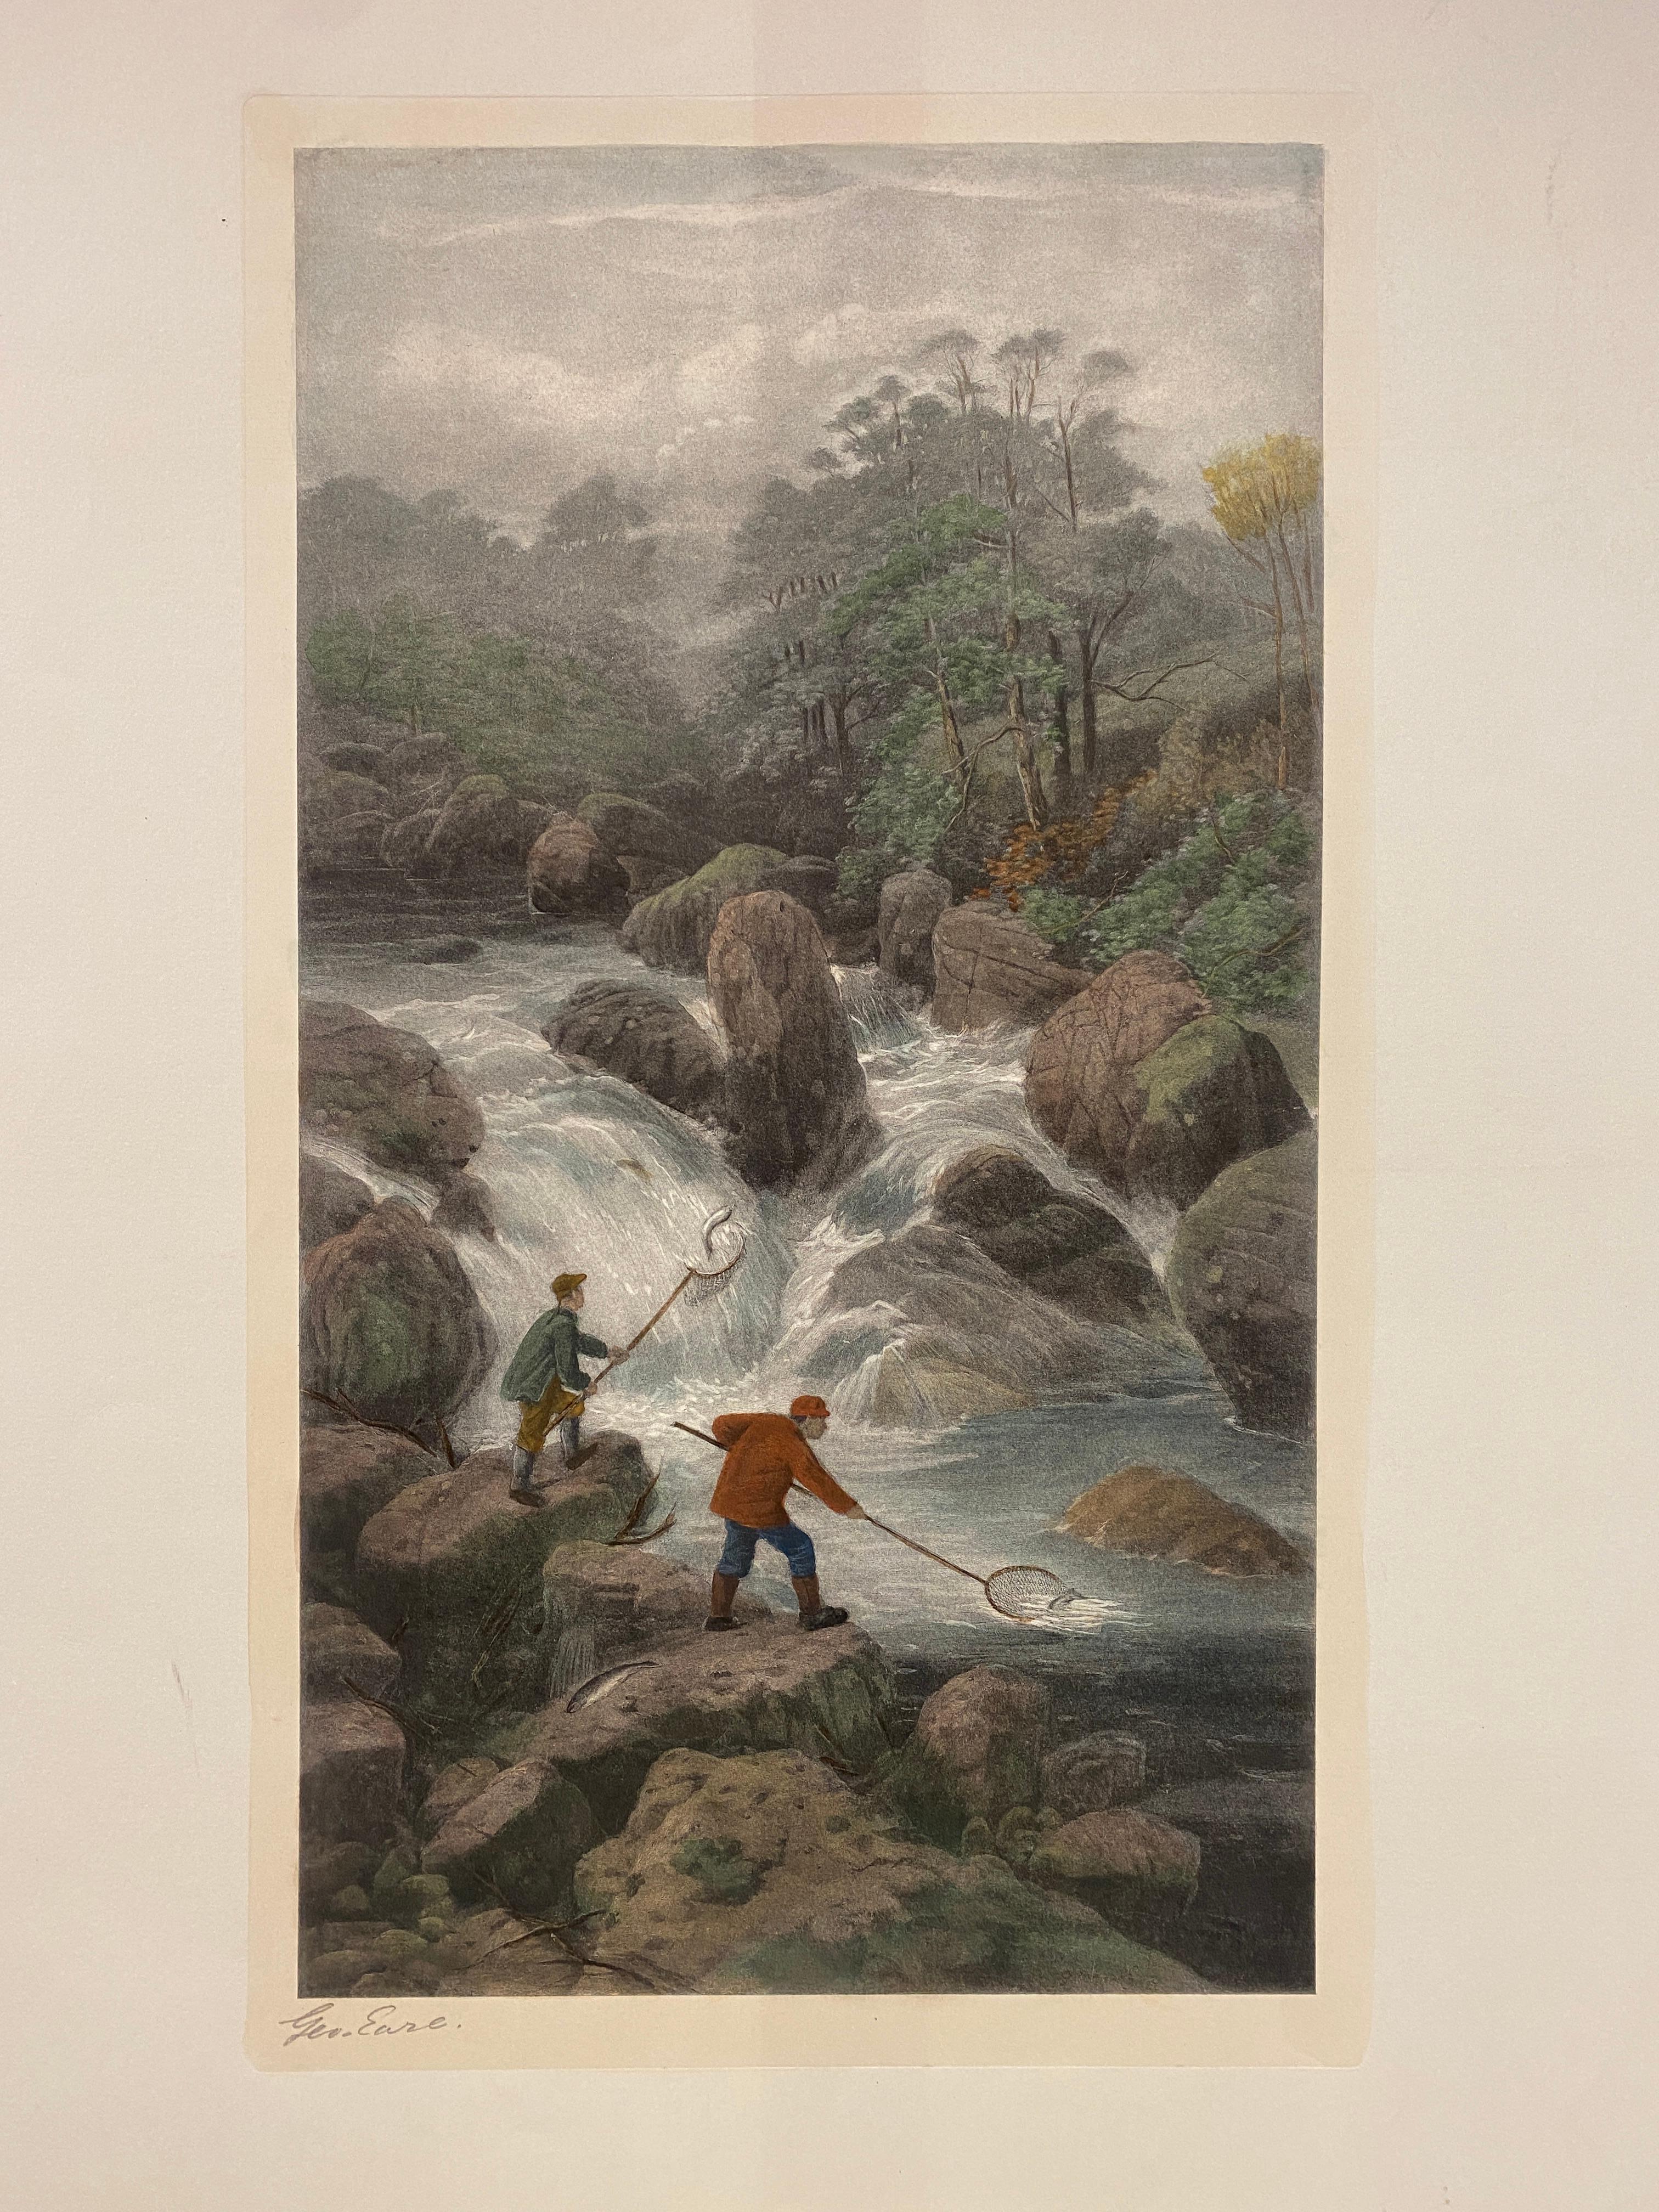 Beautiful reproduction of a typical English landscape depicting men fishing. 
The original was made by Geroge Earl, a famous English painter and illustrator. 
Bottom right is the author's signature 'Geo Earl'.

All the prints are completely